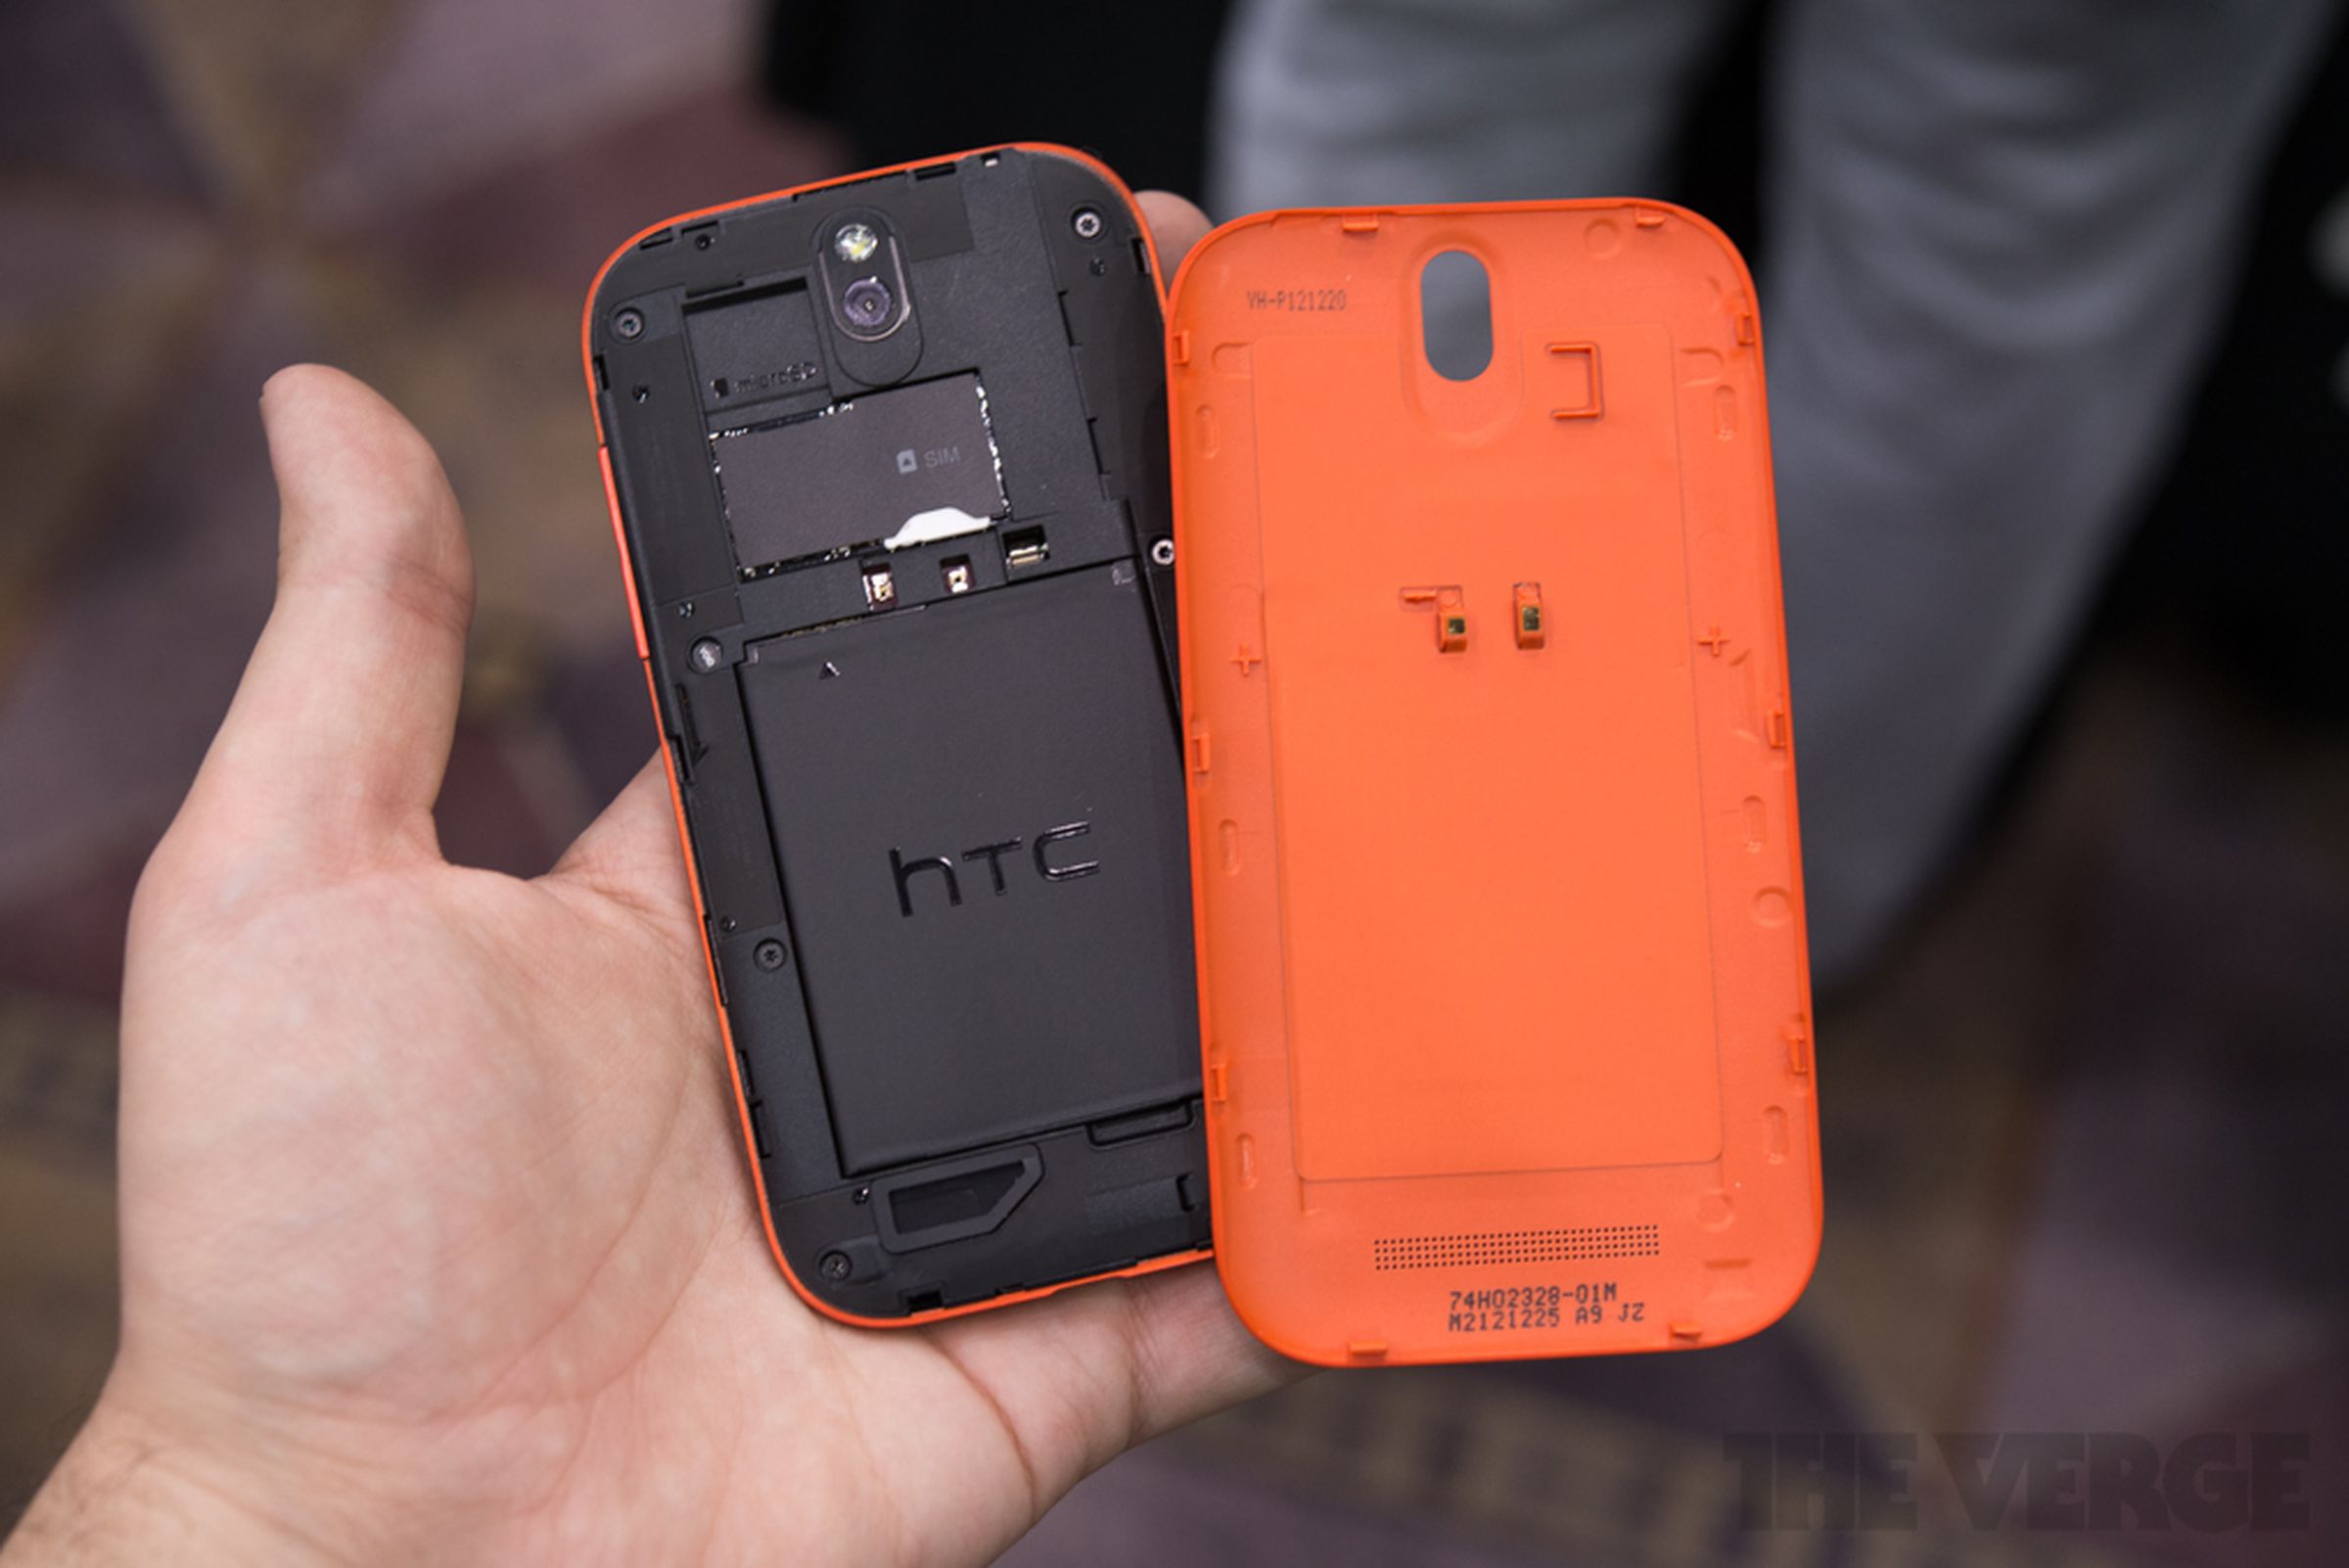 HTC One SV for Cricket hands-on photos